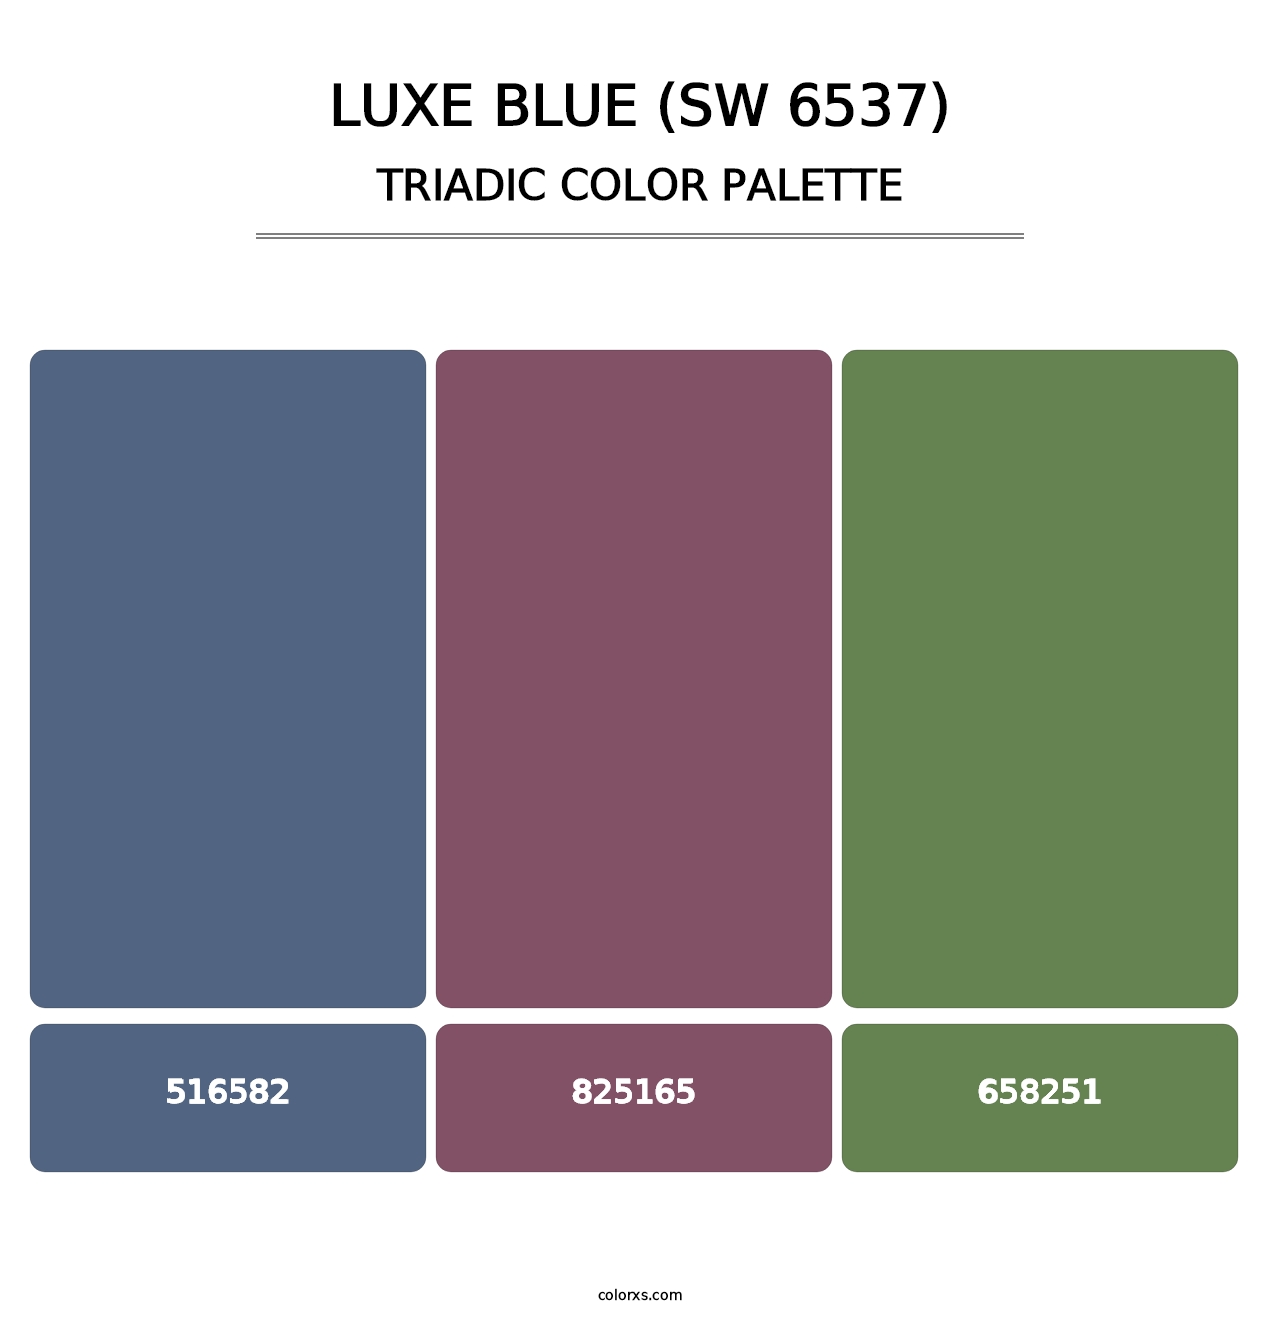 Luxe Blue (SW 6537) - Triadic Color Palette